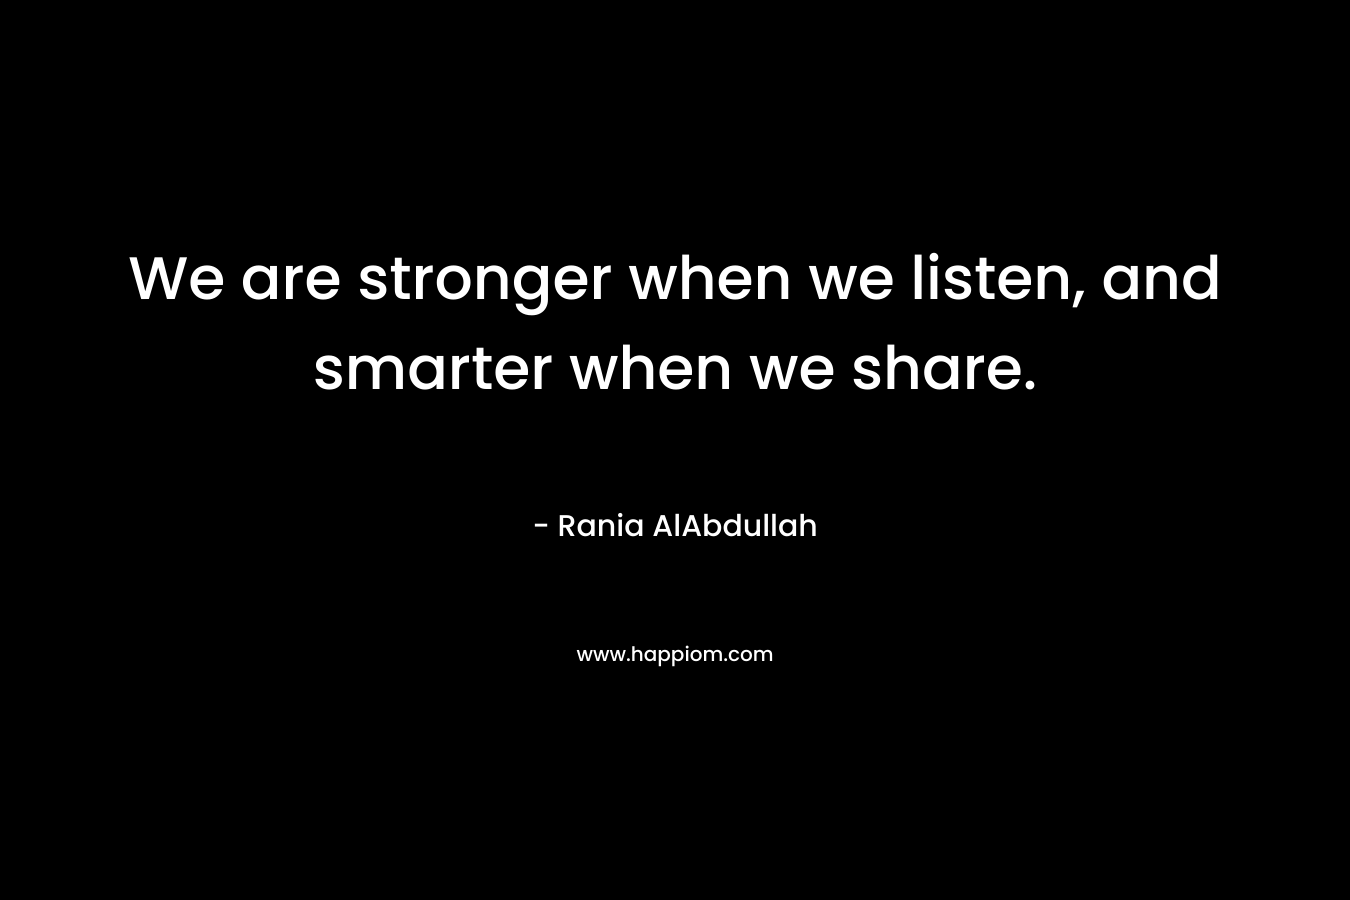 We are stronger when we listen, and smarter when we share. – Rania AlAbdullah